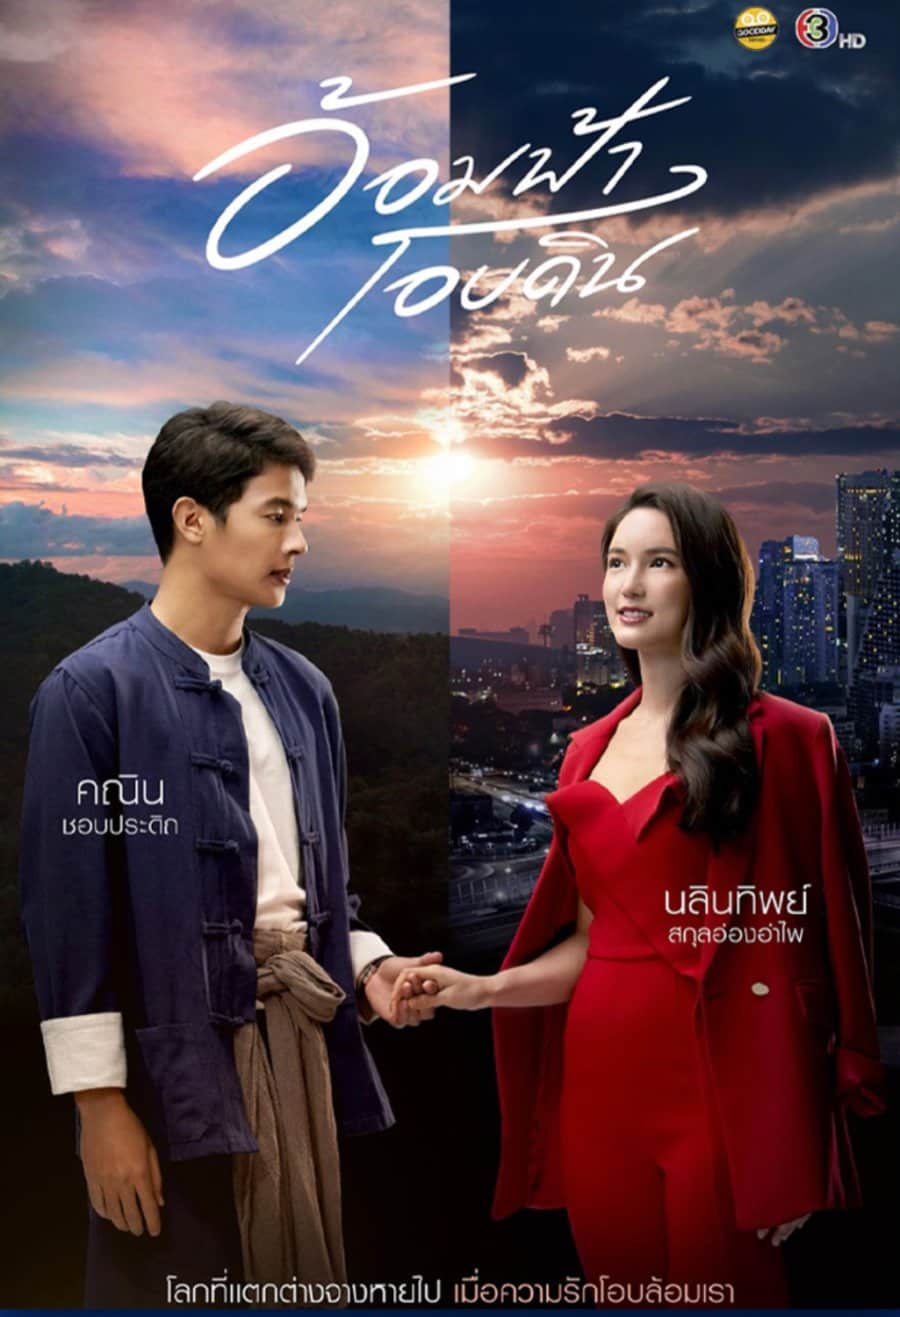 My Romance From Far Away - Sinopsis, Pemain, OST, Episode, Review